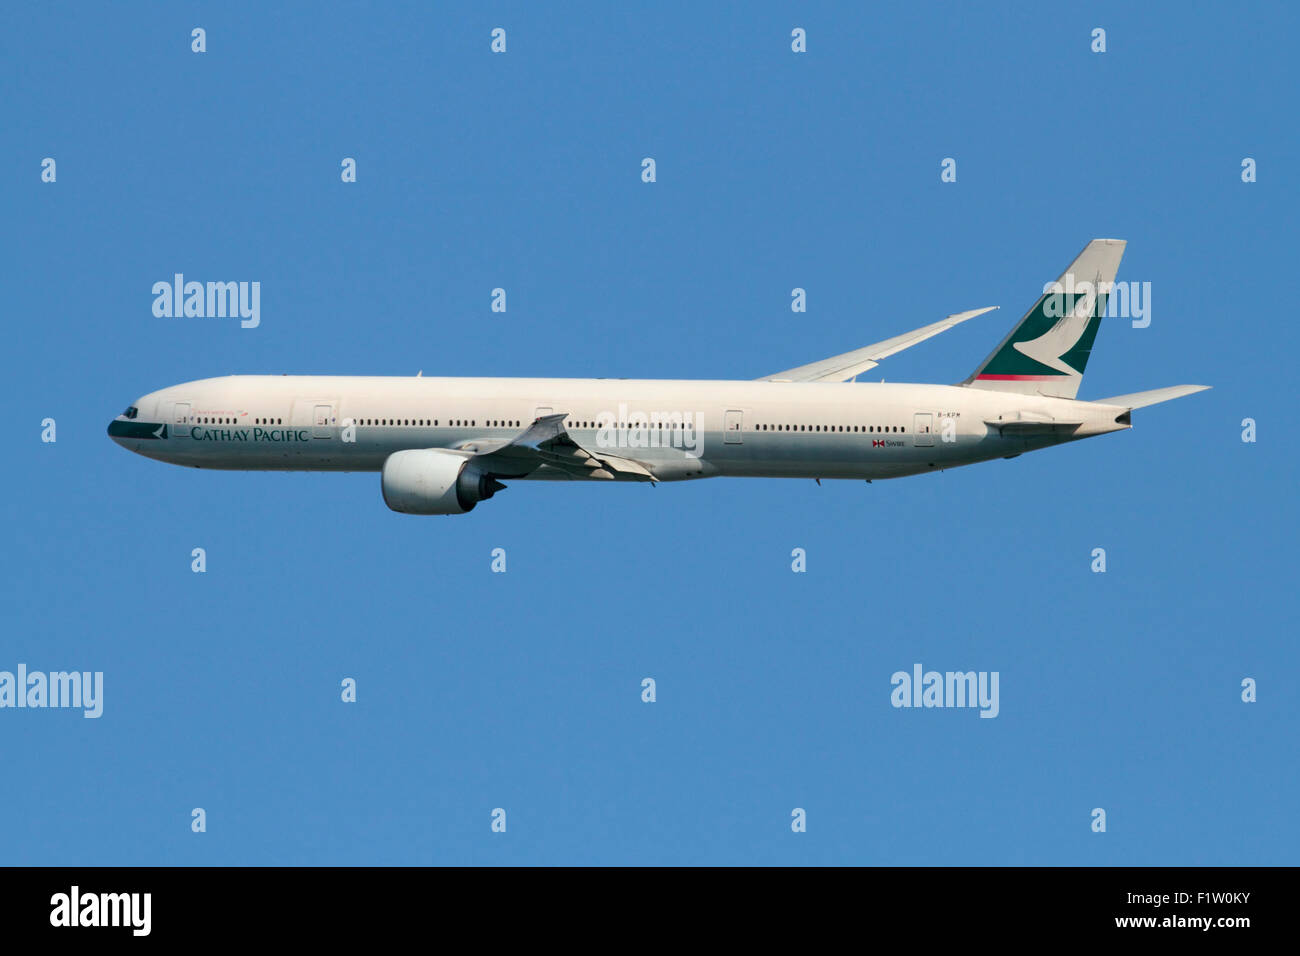 Air travel. Cathay Pacific Boeing 777-300ER long-haul widebody passenger jet plane in flight Stock Photo